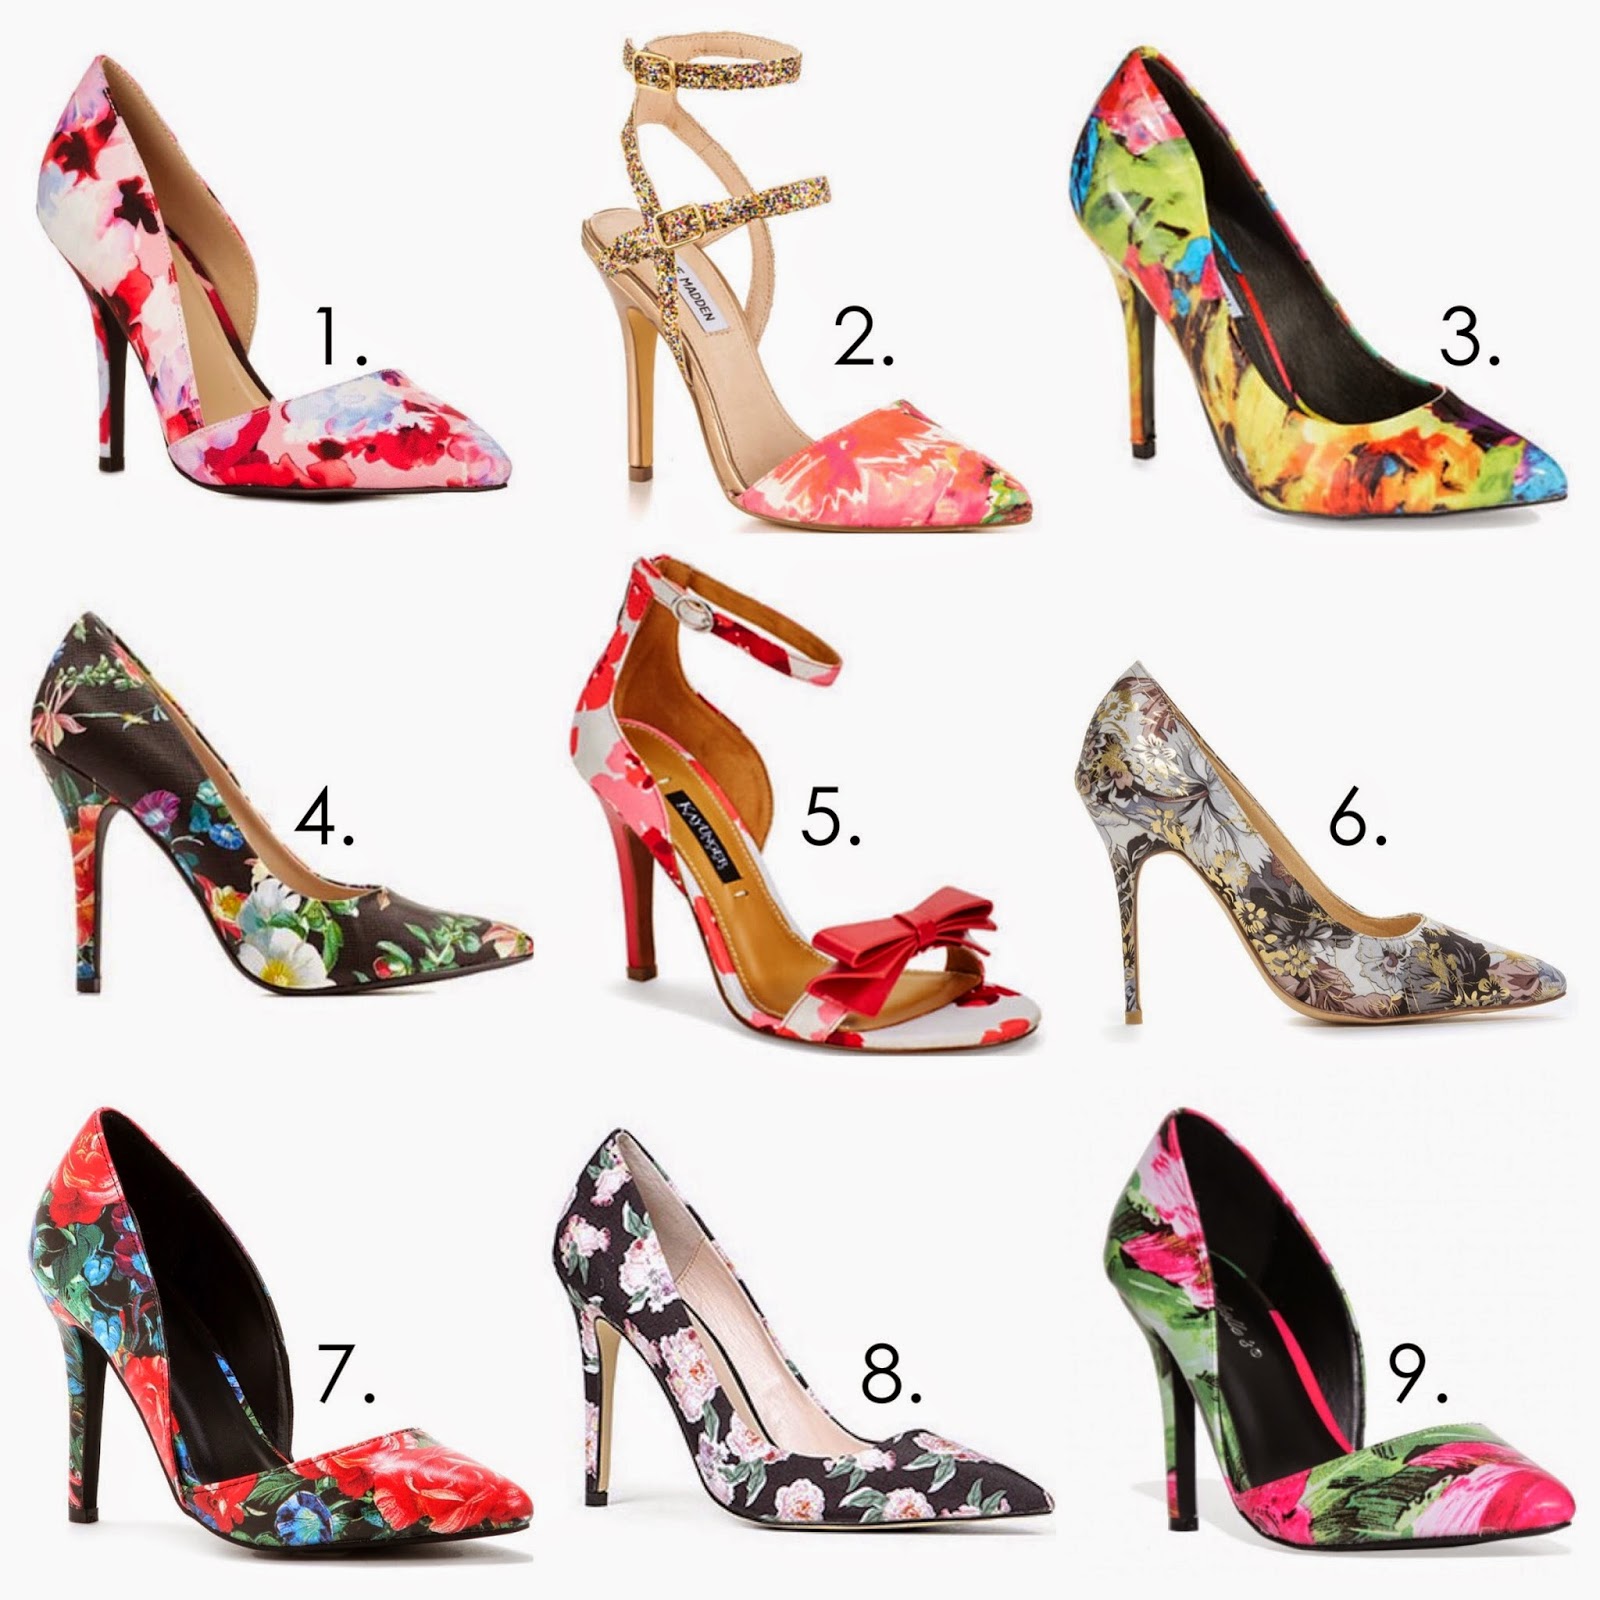 Tuesday Shoesday: Floral Heels